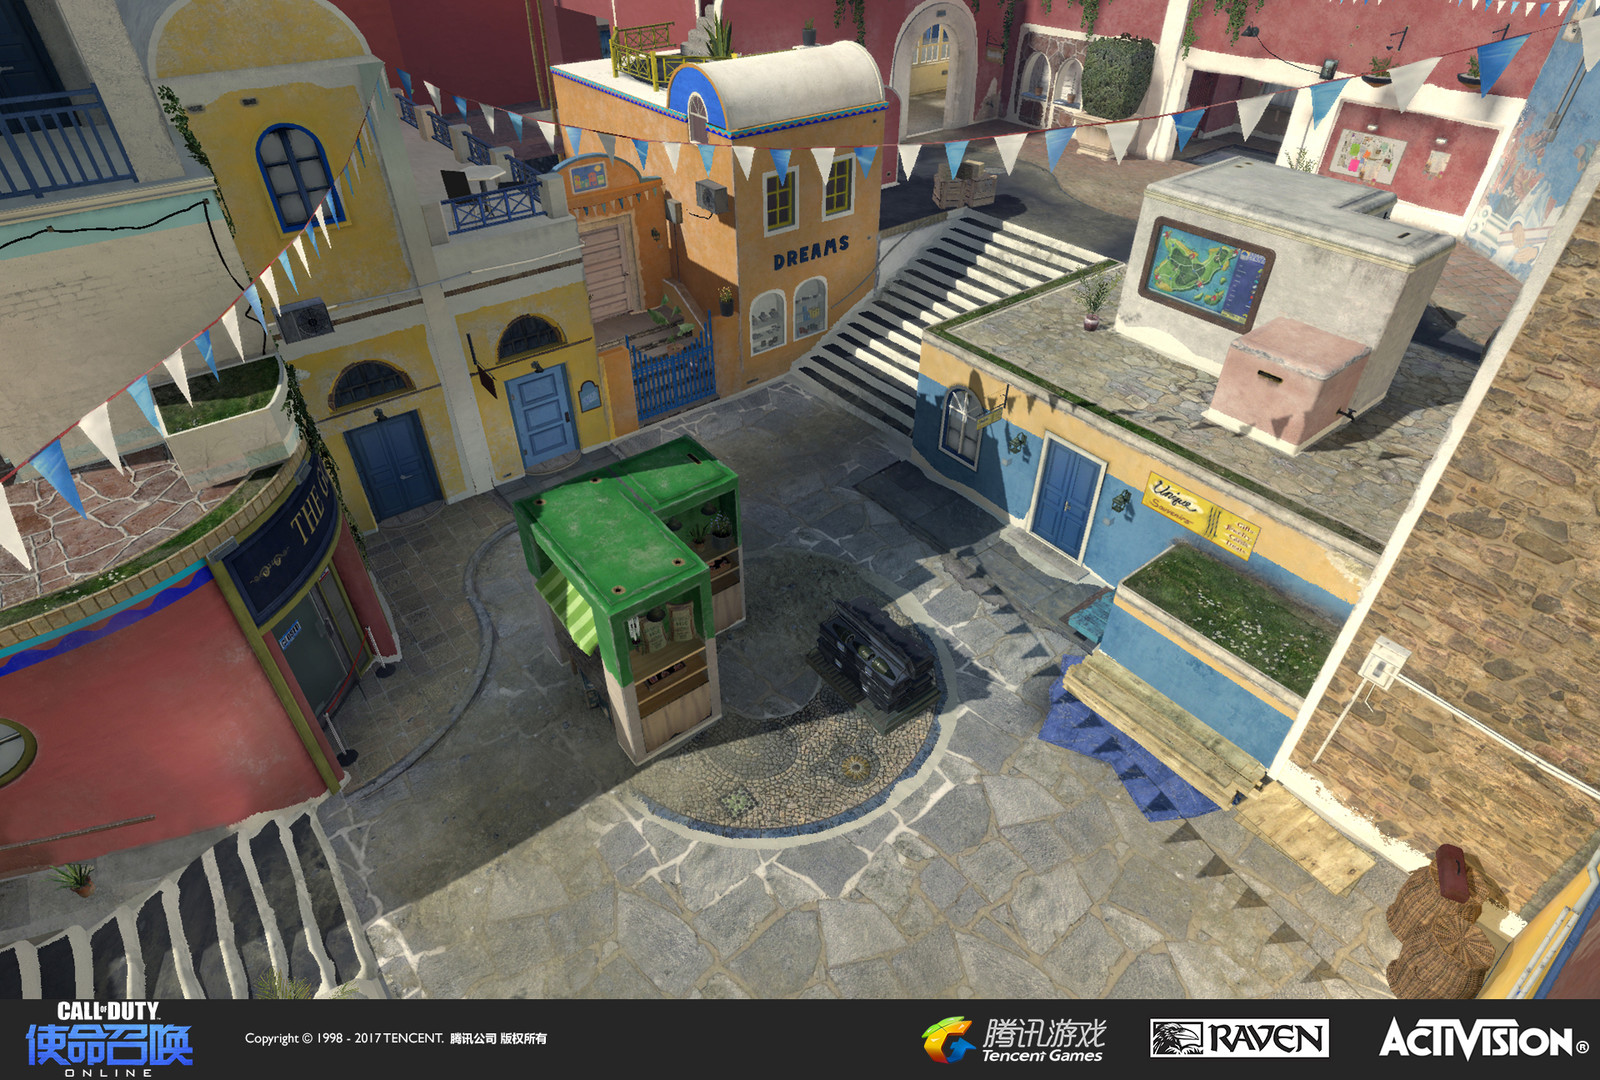 I worked on terrain geo, creating material treatments, and building some of the storefronts (the Blue/yellow striped facade on the lower level). The mosaic in the center was imported from Advanced Warfare's mp map Terrace.